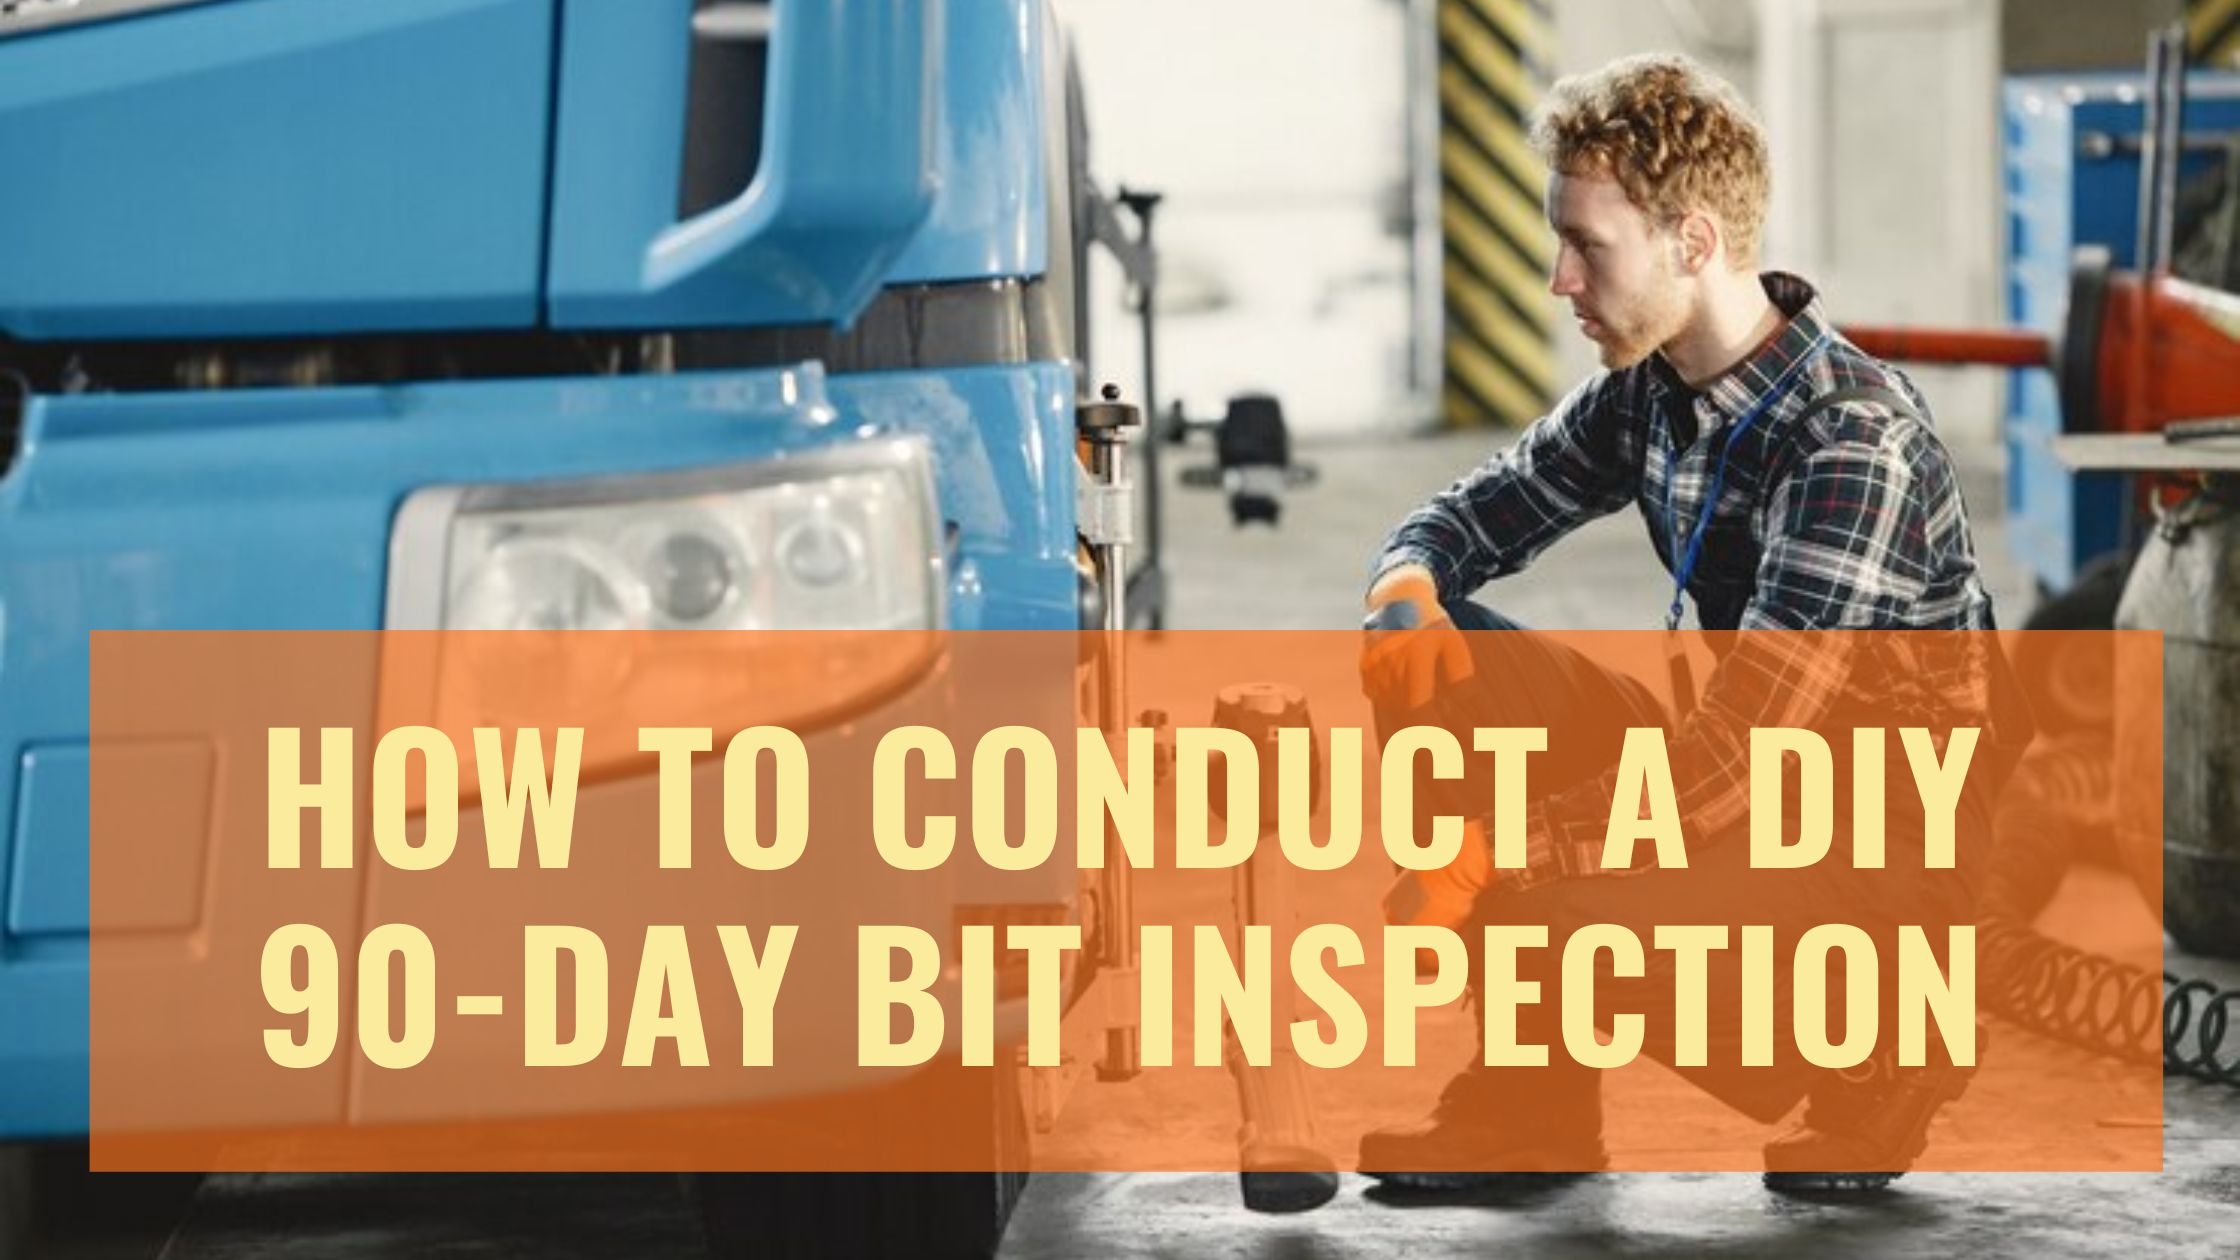 How to Conduct a DIY 90-Day Bit Inspection